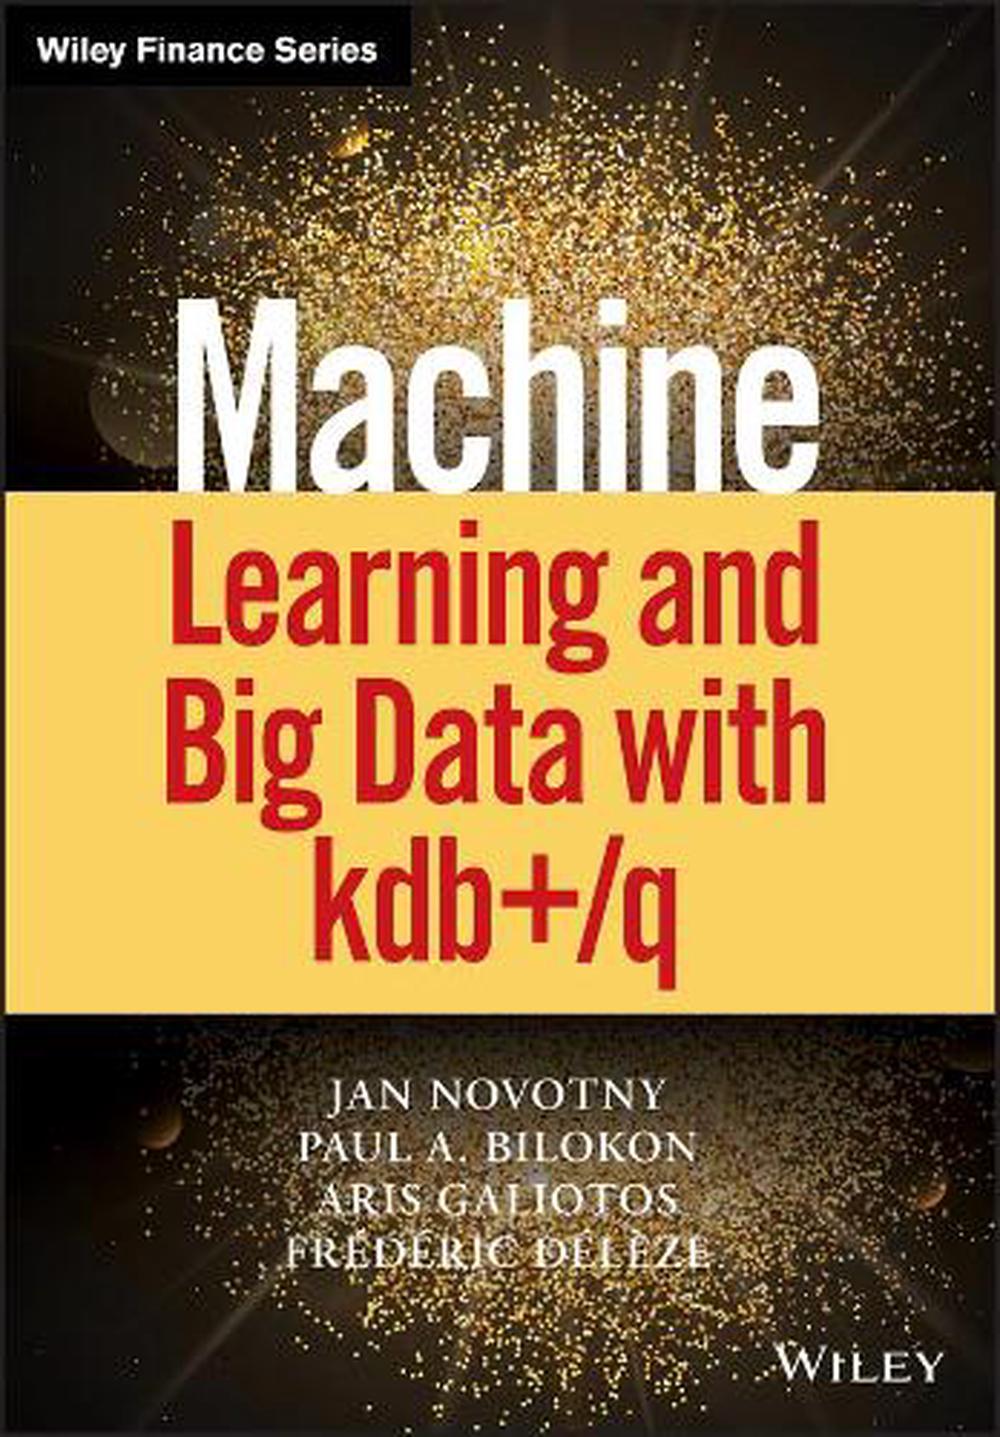 Paul　Machine　9781119404750　Big　A.　Buy　Data　at　with　Nile　kdb+/q　The　by　Bilokon,　Hardcover,　online　Learning　and